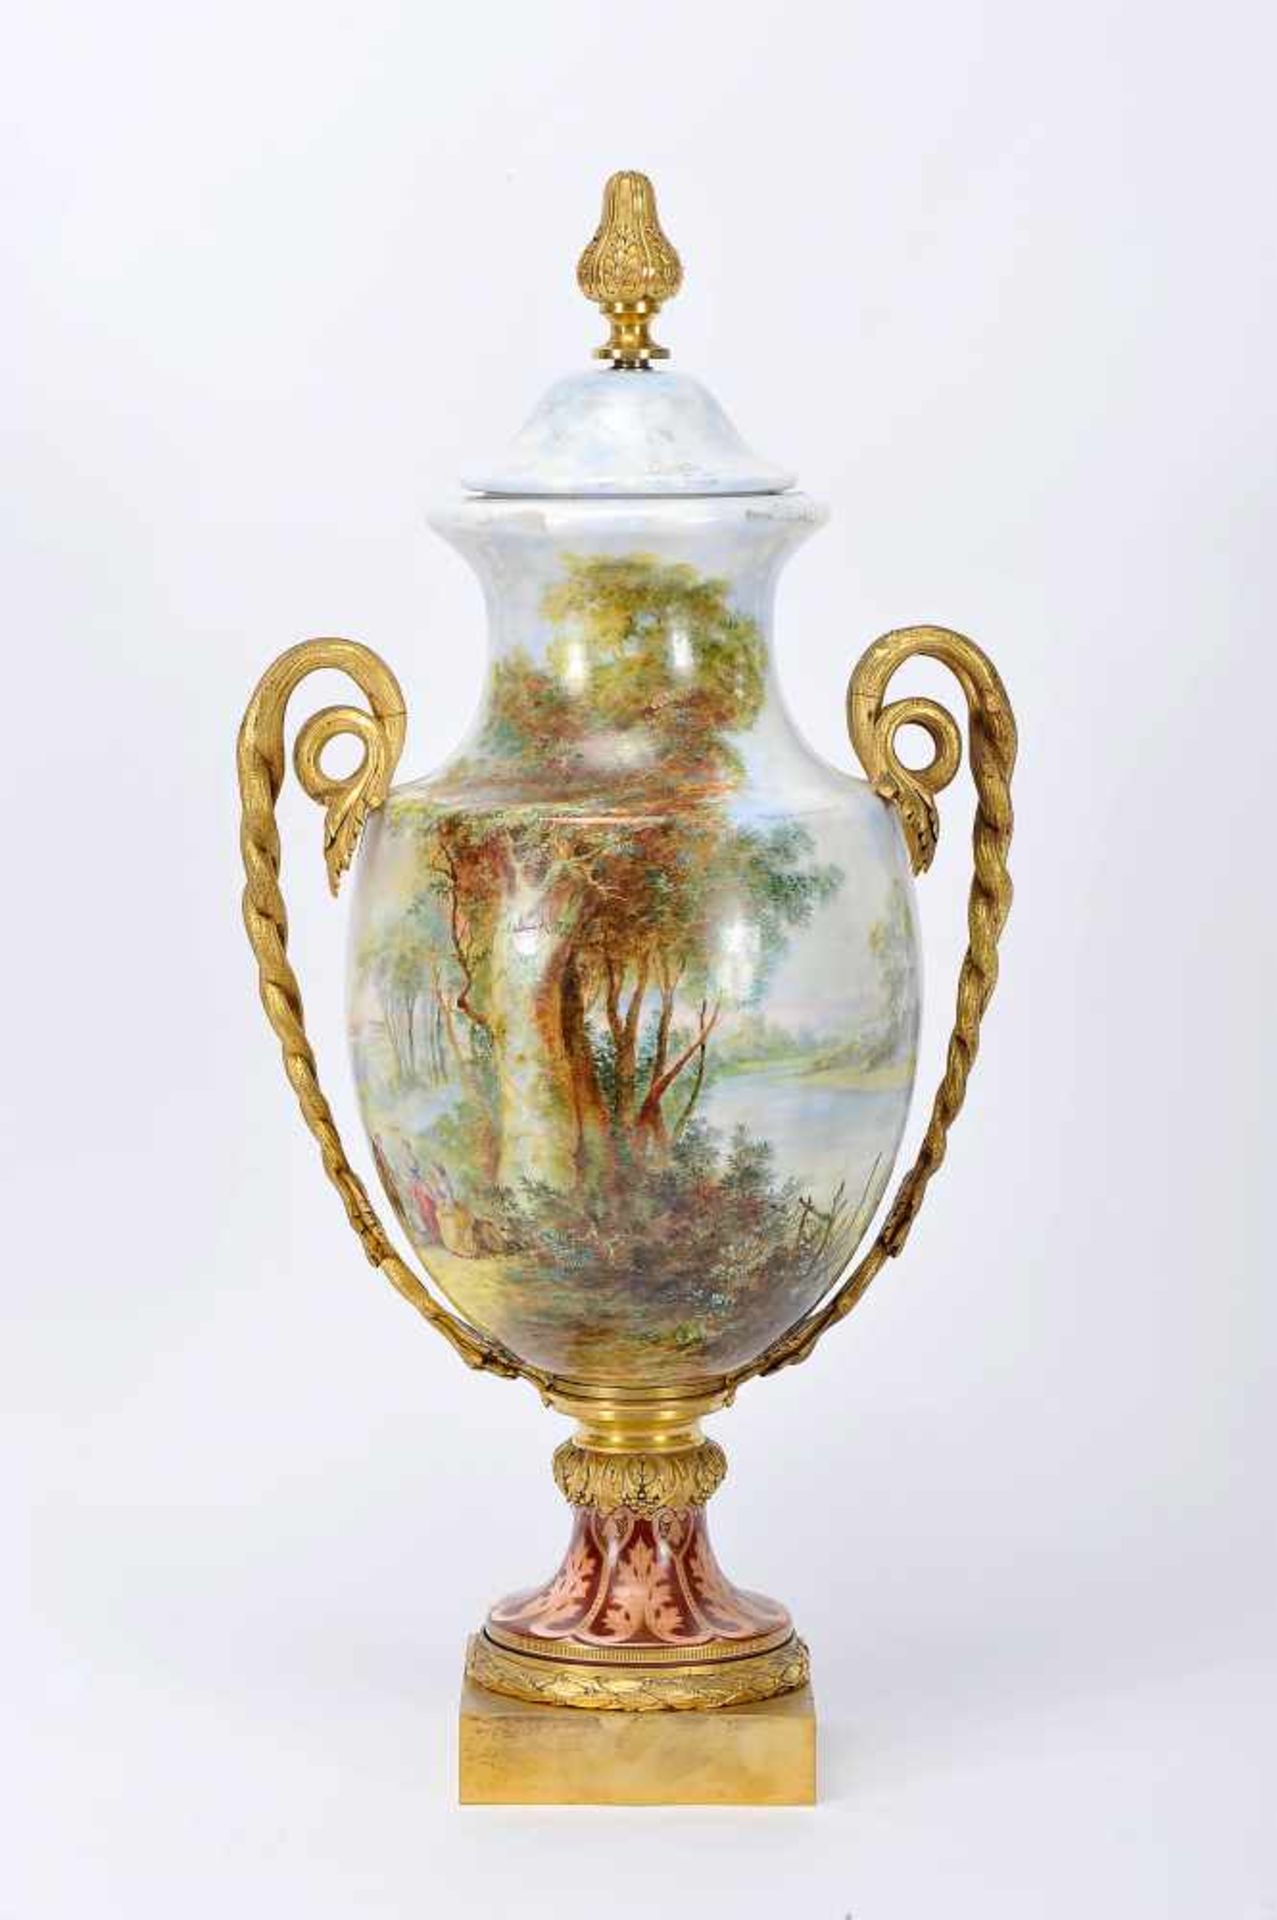 An Urn, painted milk glass, polychrome decoration "Landscape with grove", gilt bronze applications